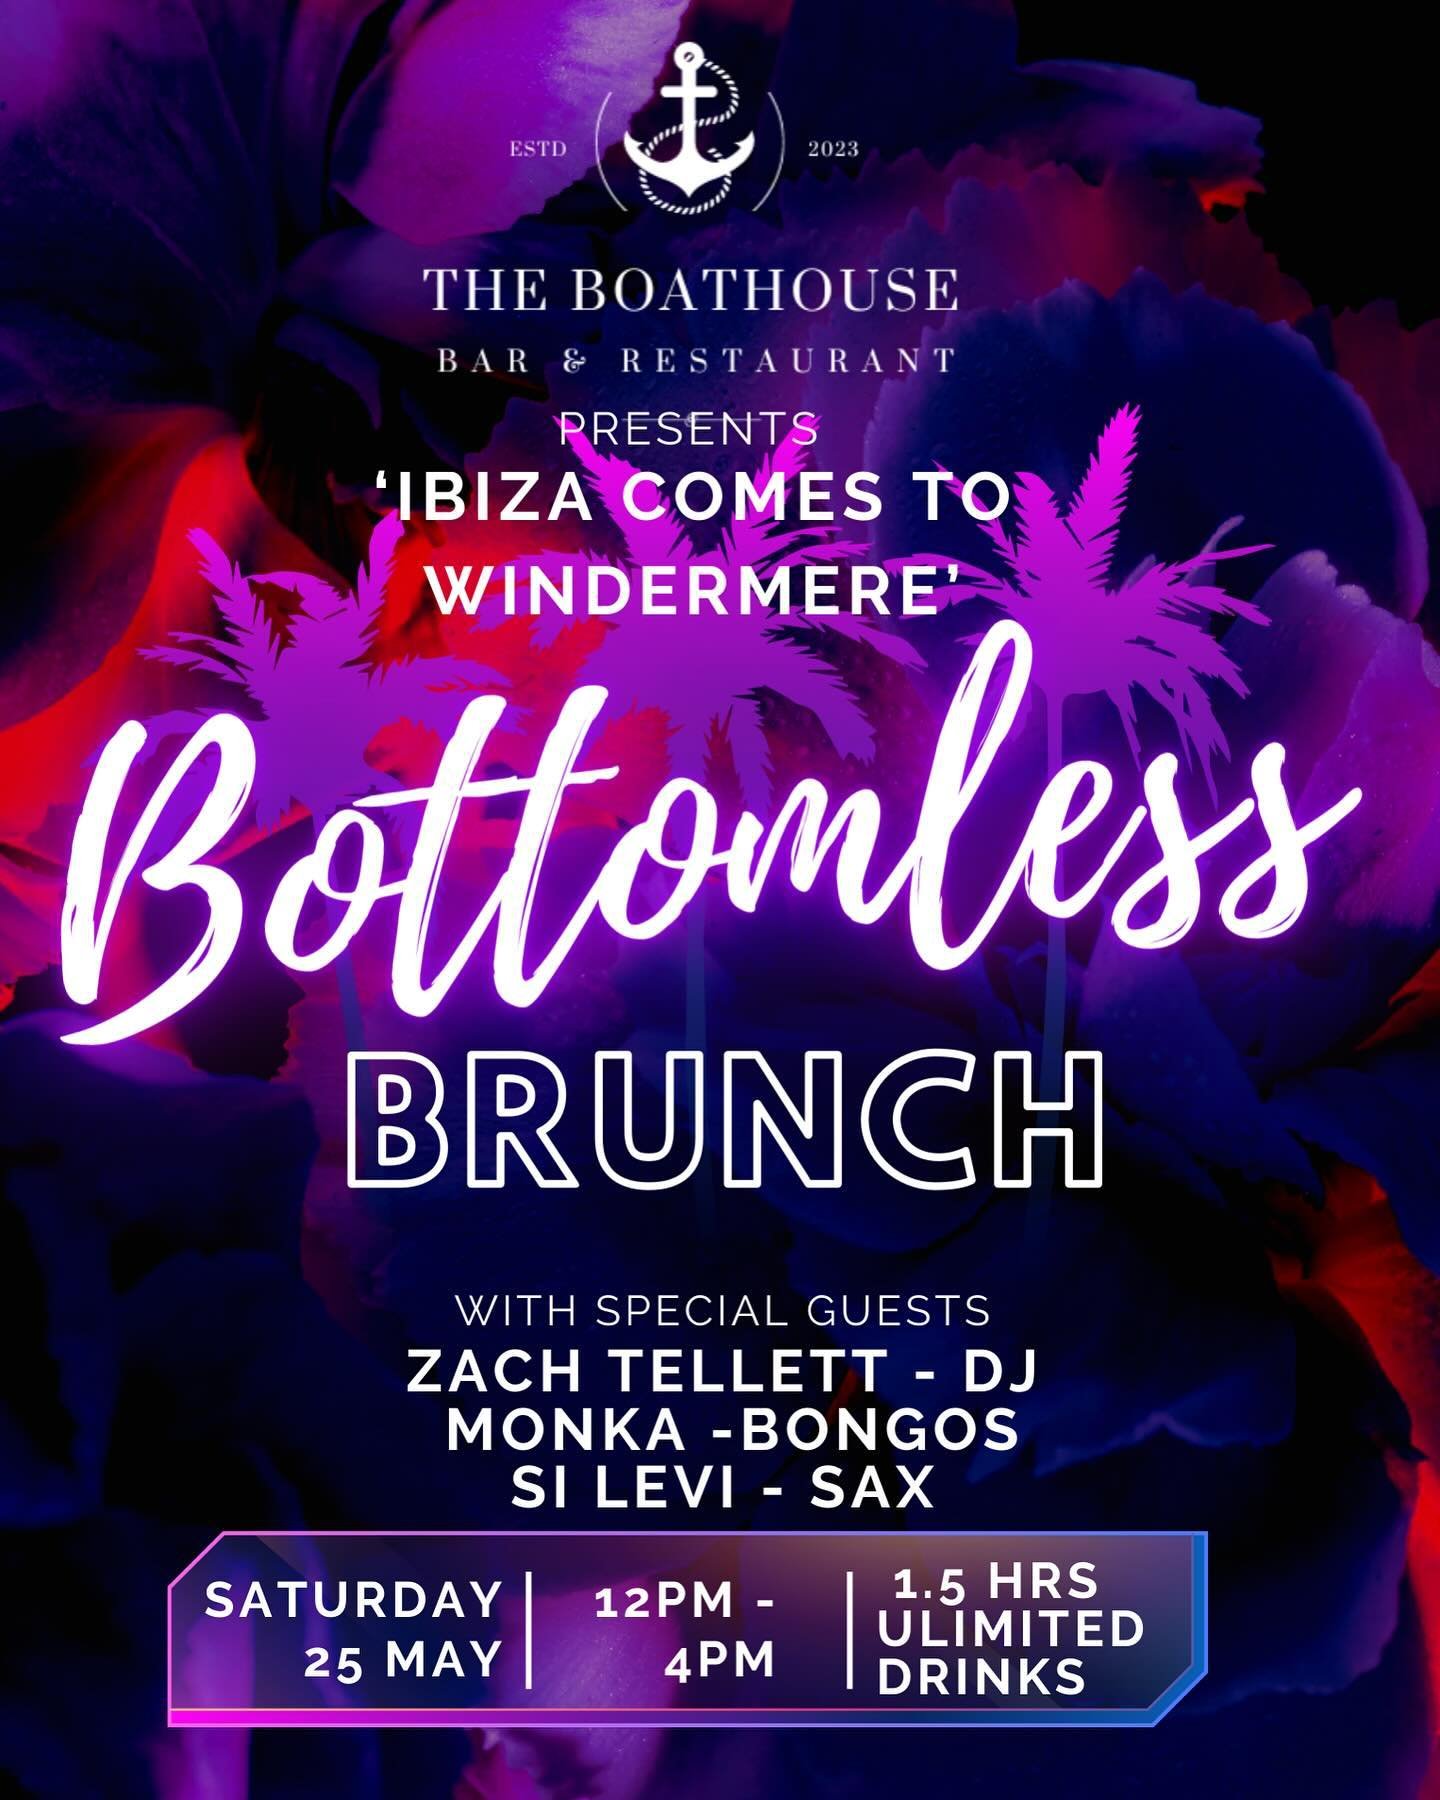 We can&rsquo;t wait for this one 🎷

IBIZA COMES TO WINDERMERE - Bottomless Burch done the right way! BANK HOLIDAY WEEKEND

Saturday 25 May - 12pm - 4pm

3 Course Brunch! 🍕
1.5 hours Bottomless Drinks 🍹 

With Special Guests 
@thisismonka - Percuss